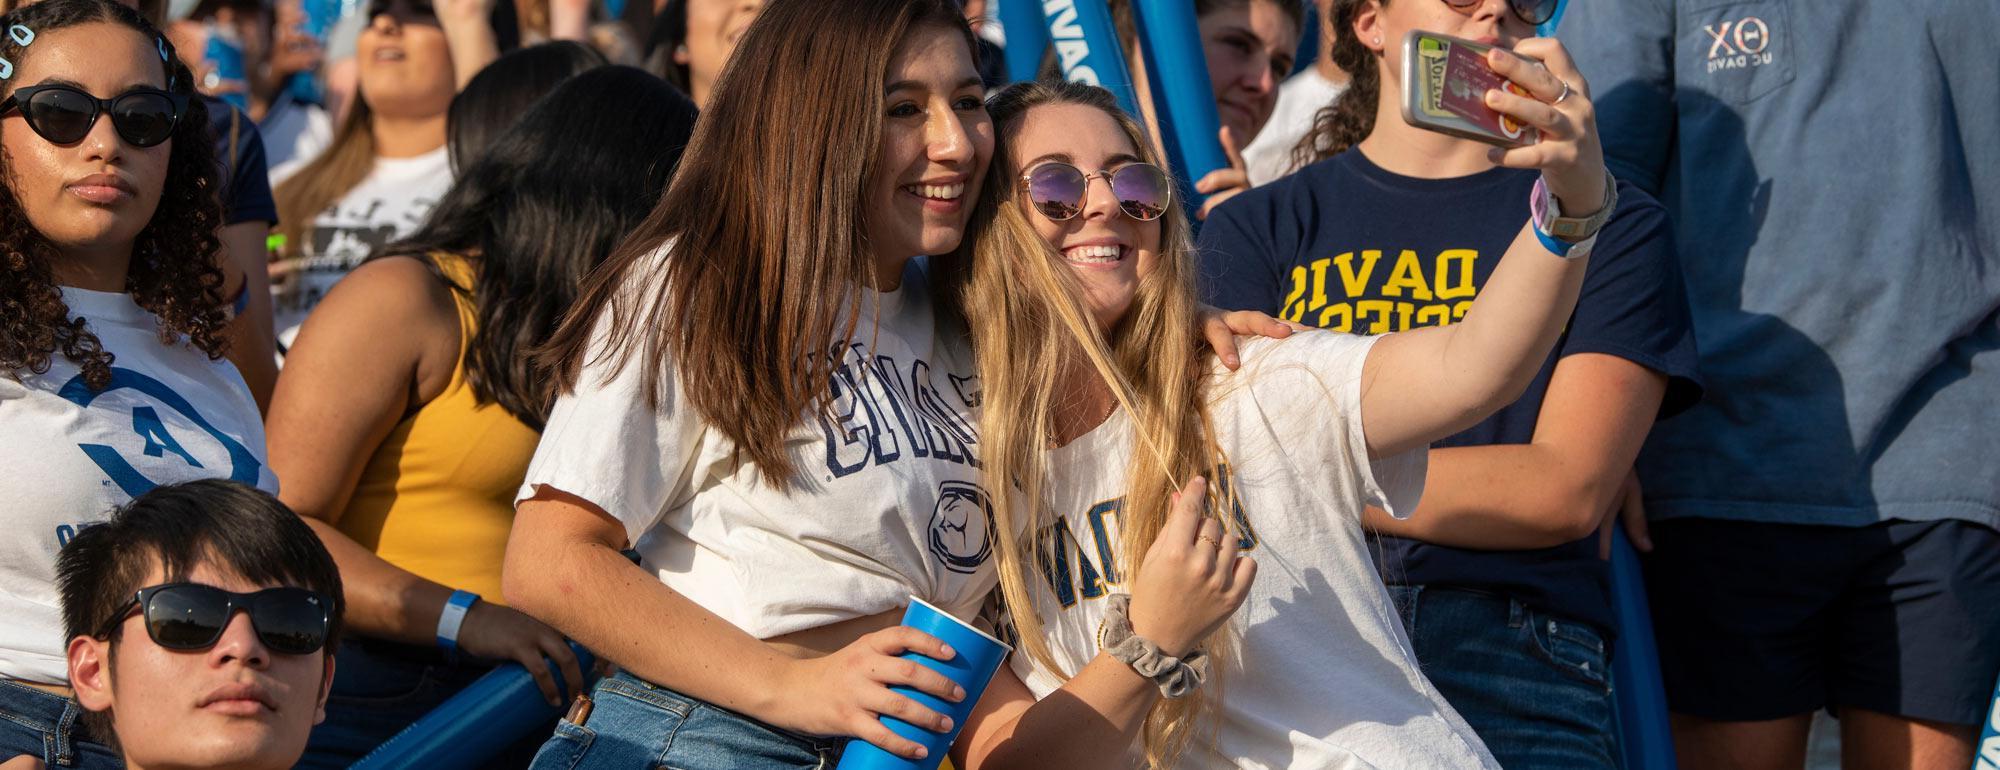 Two females students take a selfy in the crowd at a raucous football game